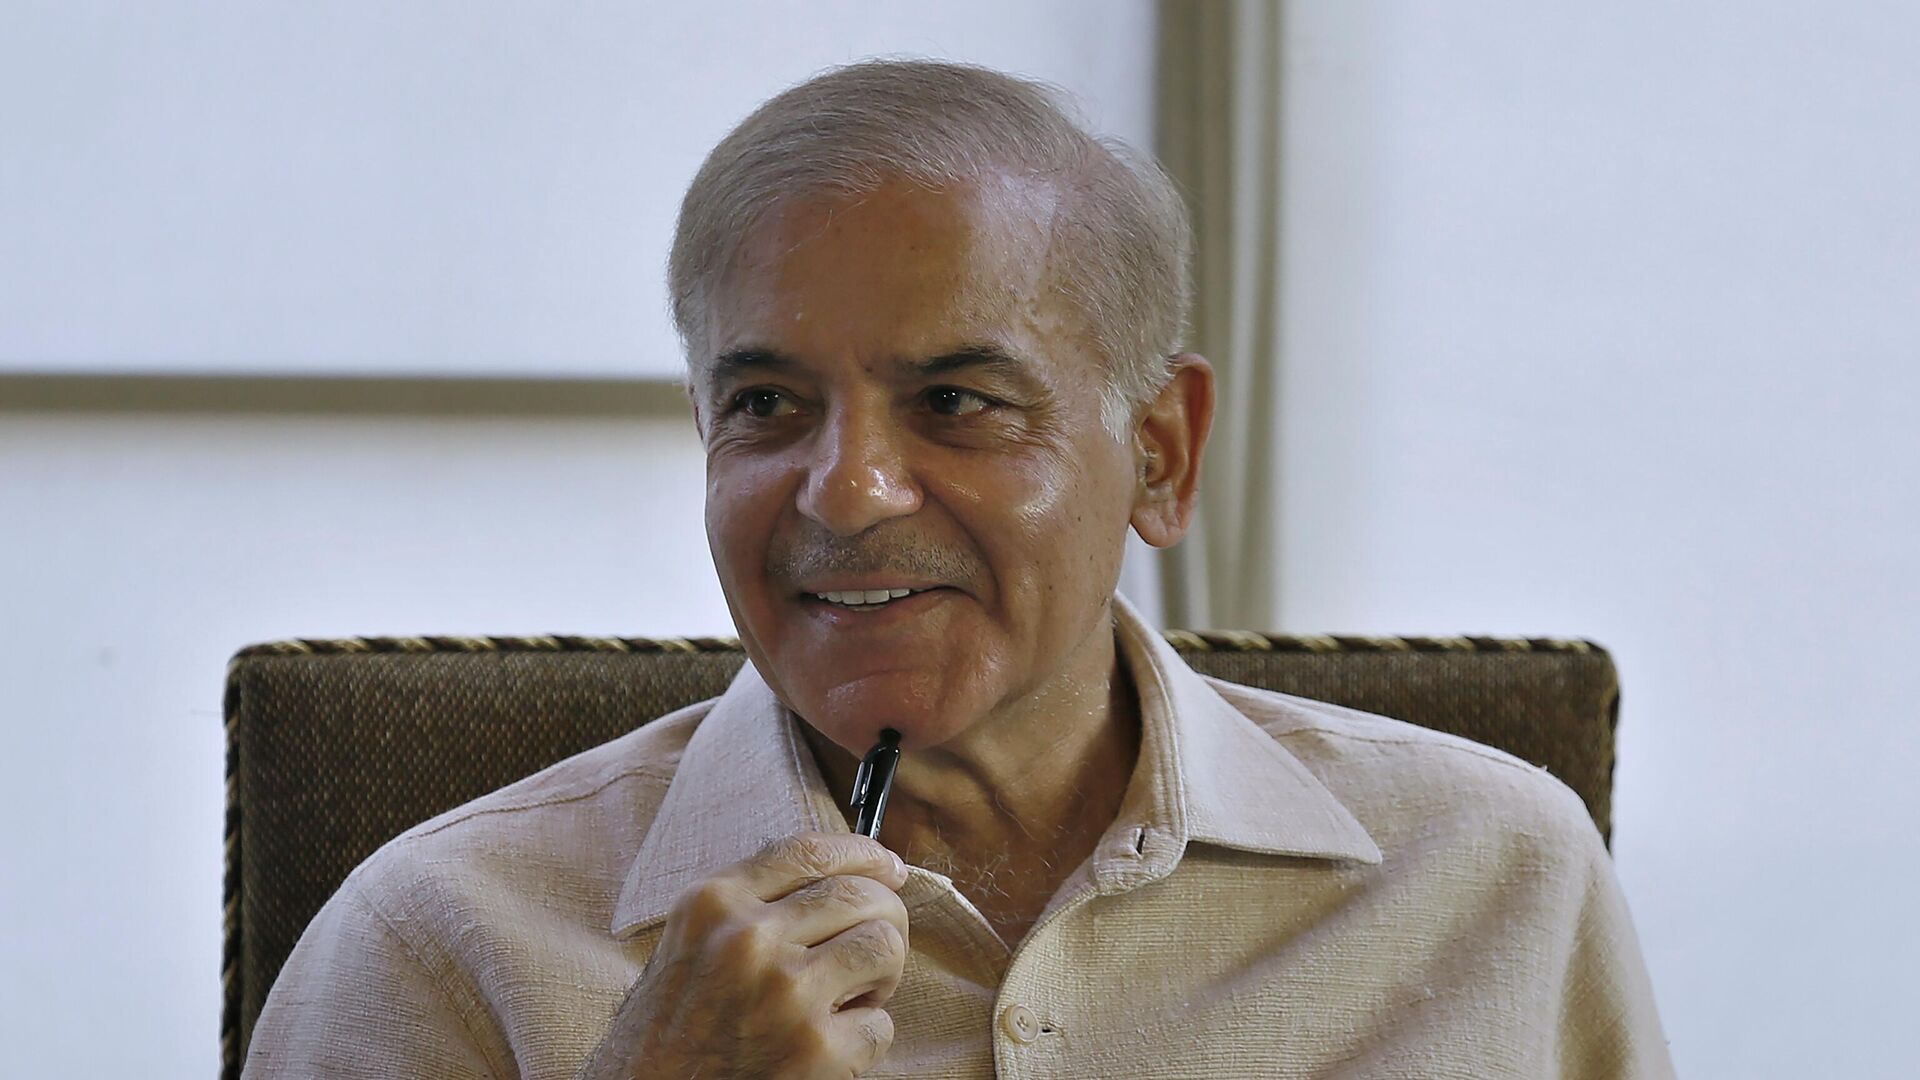 Pakistan's opposition leader Shahbaz Sharif smiles during a press conference, in Islamabad, Pakistan, Wednesday, March 30, 2022. Lawmakers appeared poised to push Prime Minister Imran Khan out of power in an upcoming no-confidence vote, after a small but key coalition partner abandoned him and joined the opposition. (AP Photo/Anjum Naveed) - Sputnik International, 1920, 17.06.2022